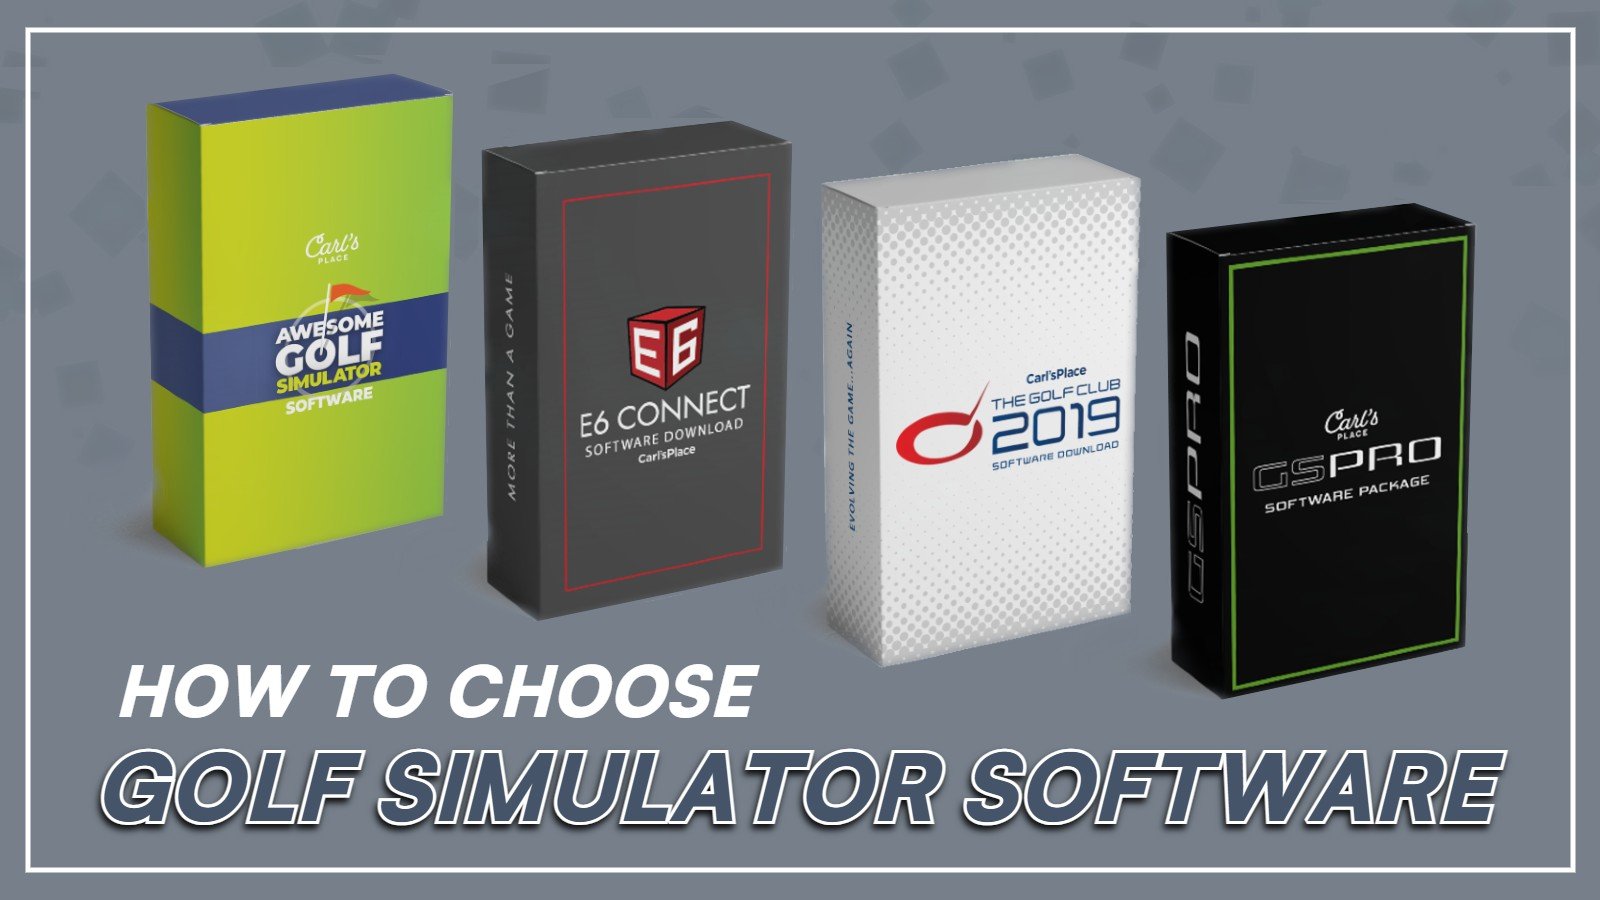 Golf simulator software - which to choose